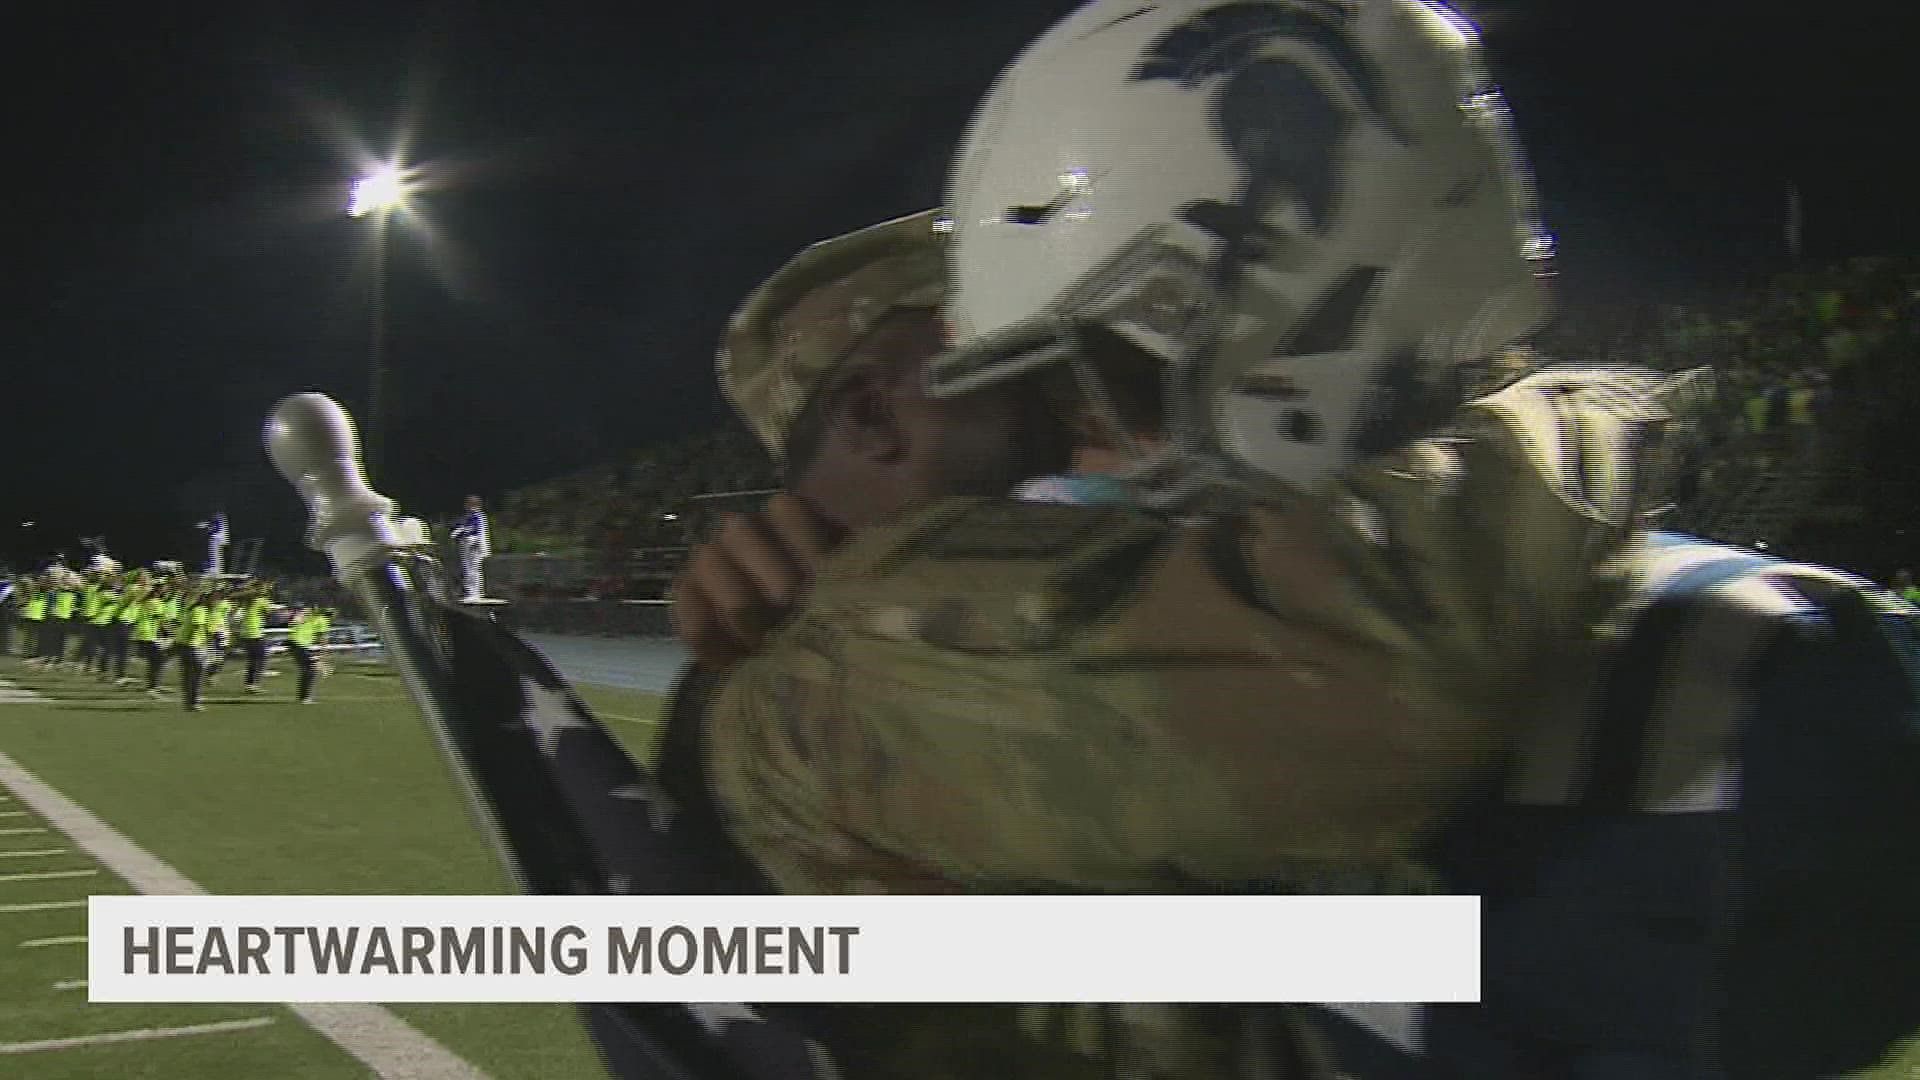 U.S. Army Lt. Colonel Kentrell Wilson surprised his son Makhi Wilson at a Pleasant Valley football game after a return home from overseas.